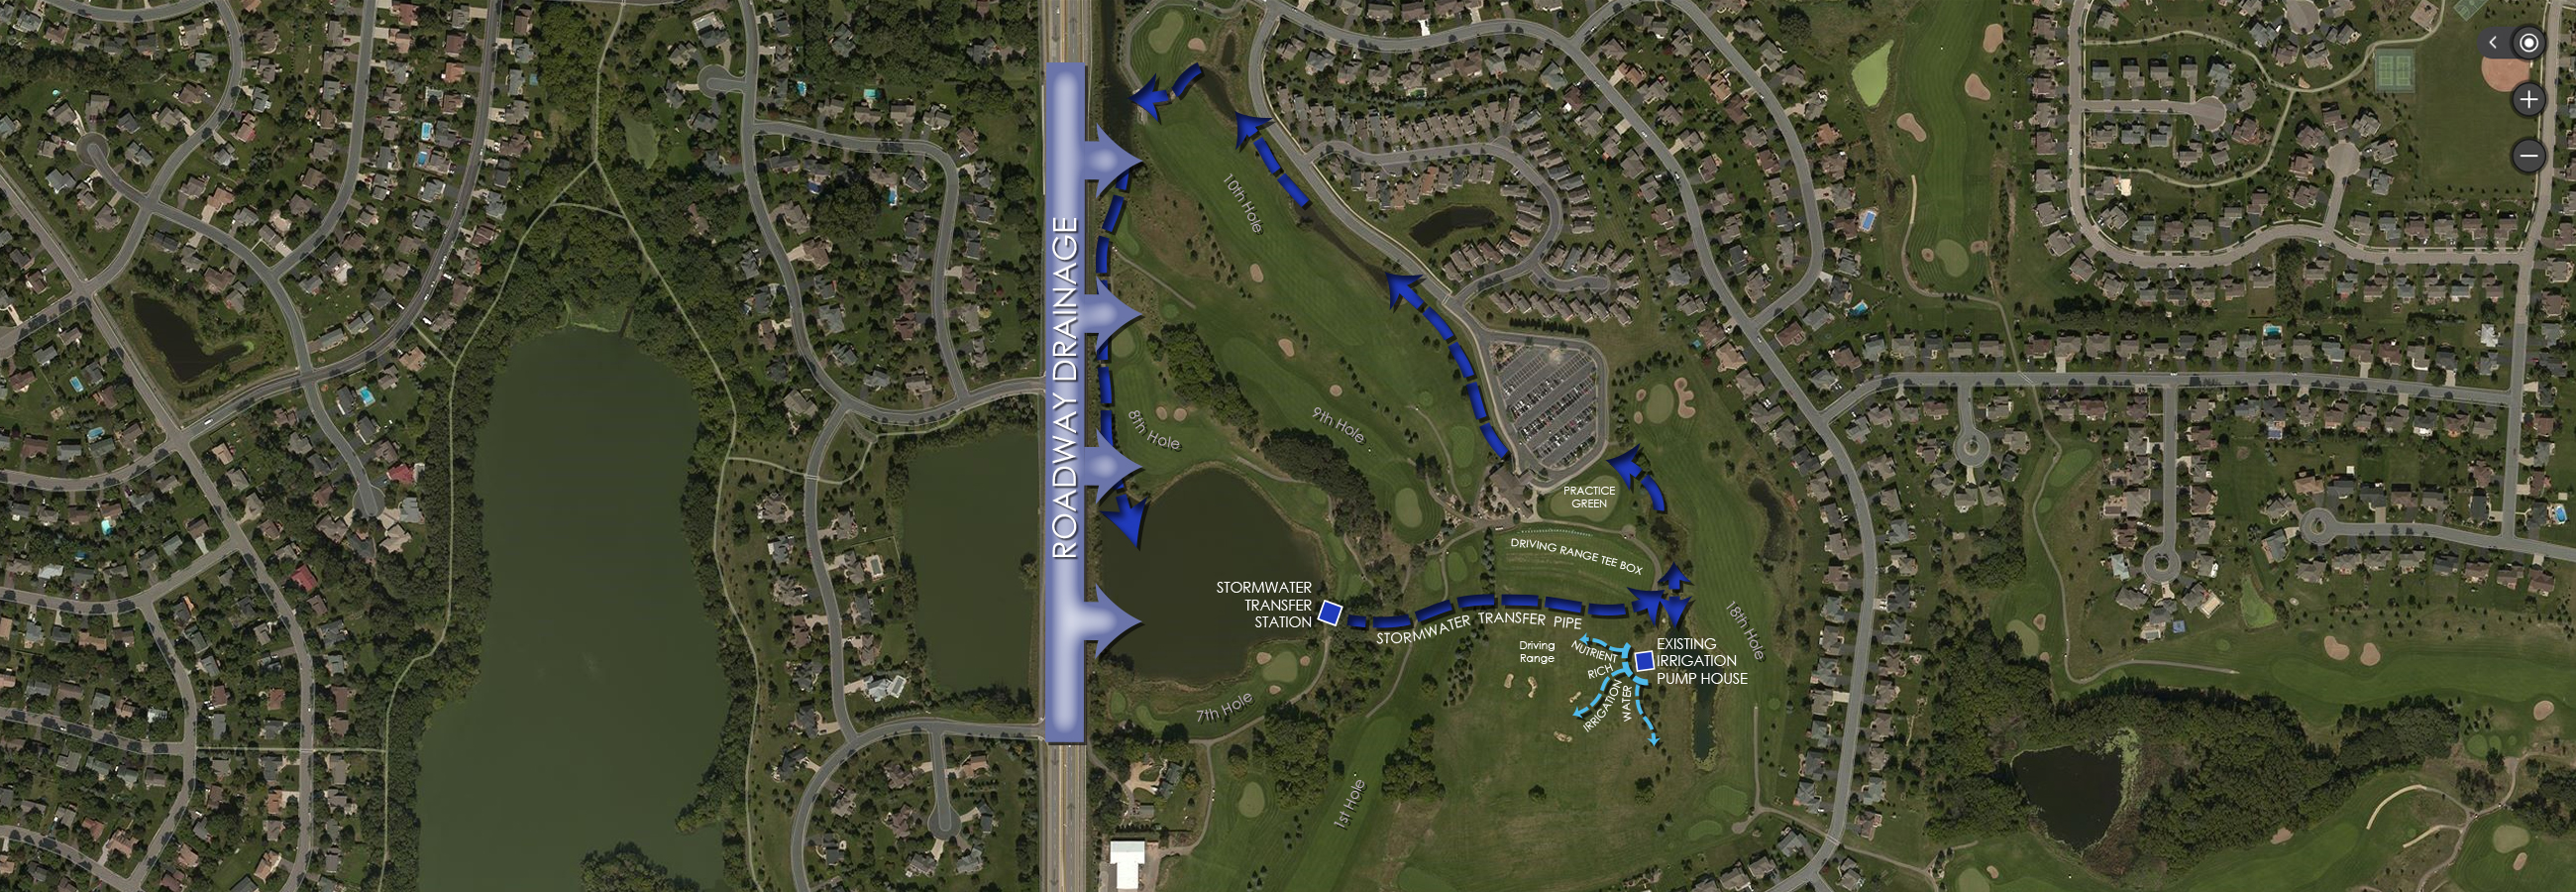 Eagle Valley golf course stormwater plan